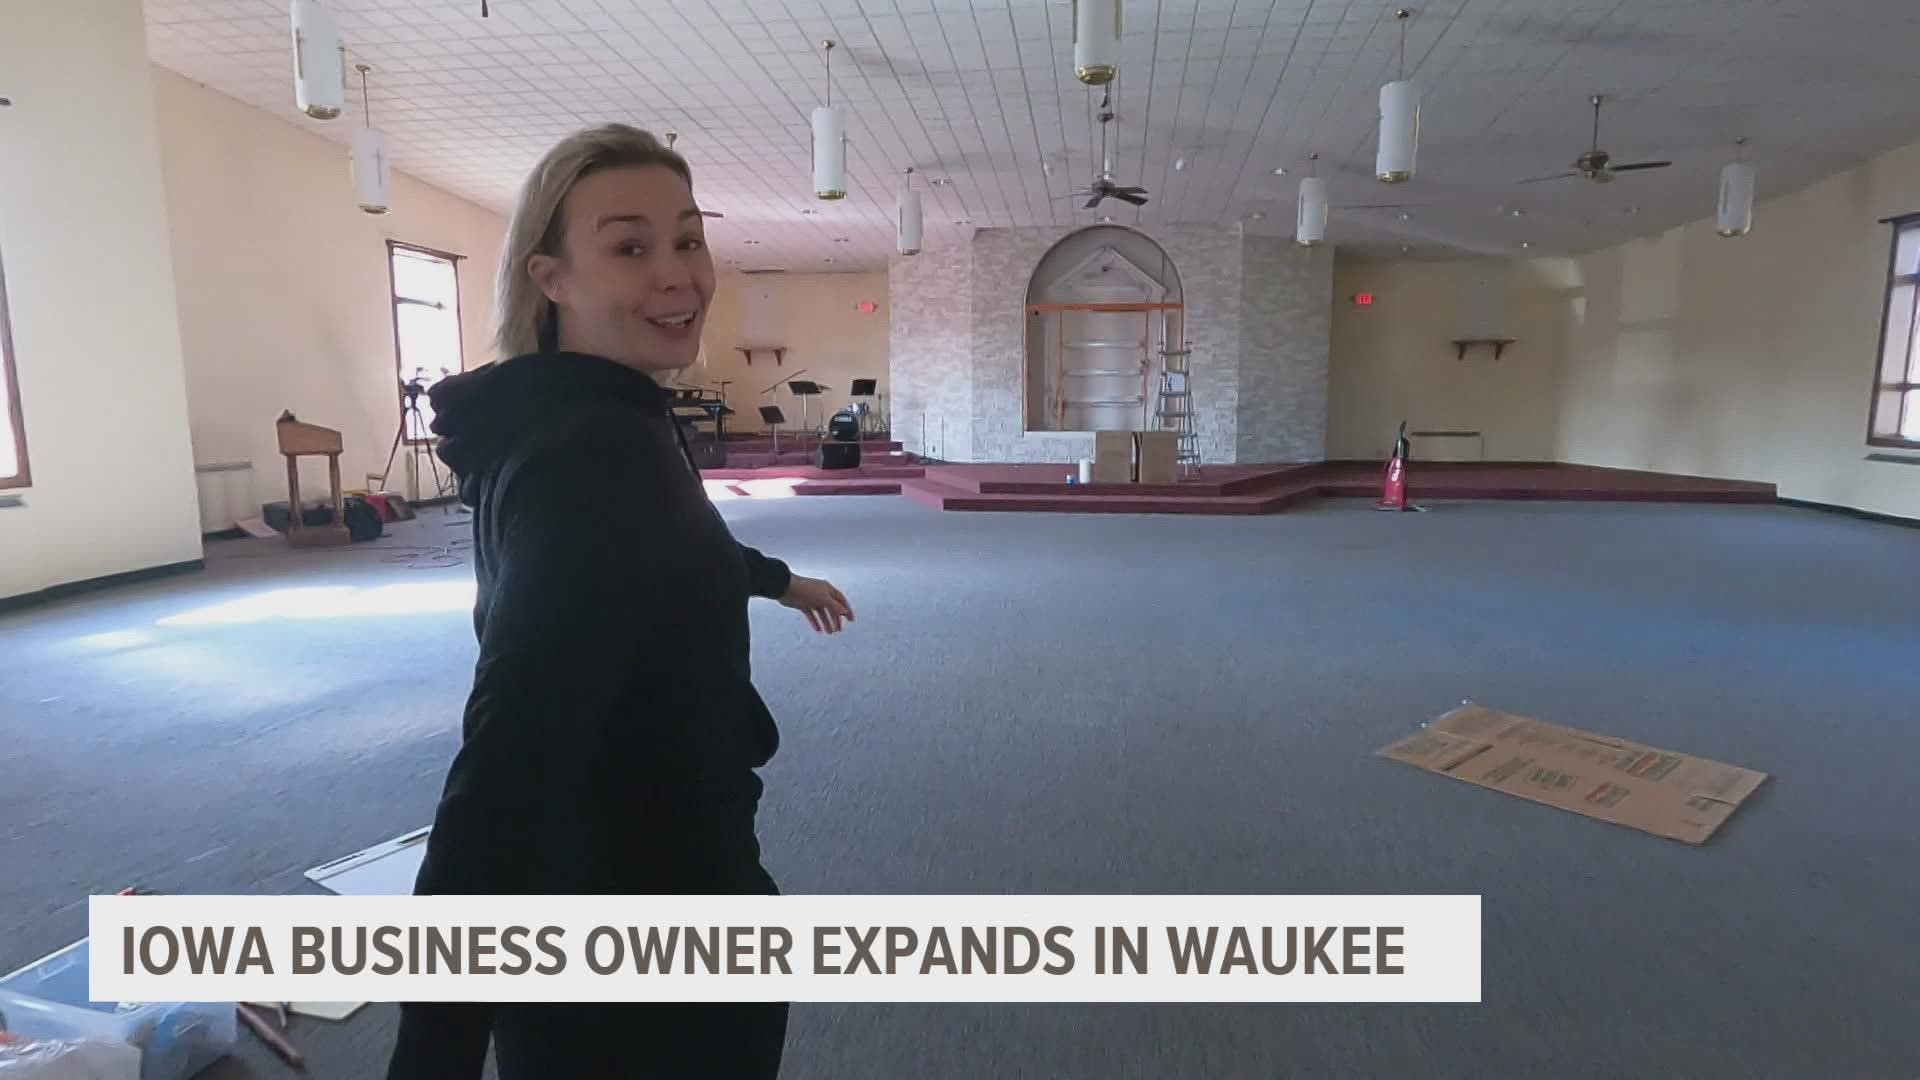 The mini Master of Business Administration program made it possible for Darci Evans to turn an old church building in Waukee into a new gym.